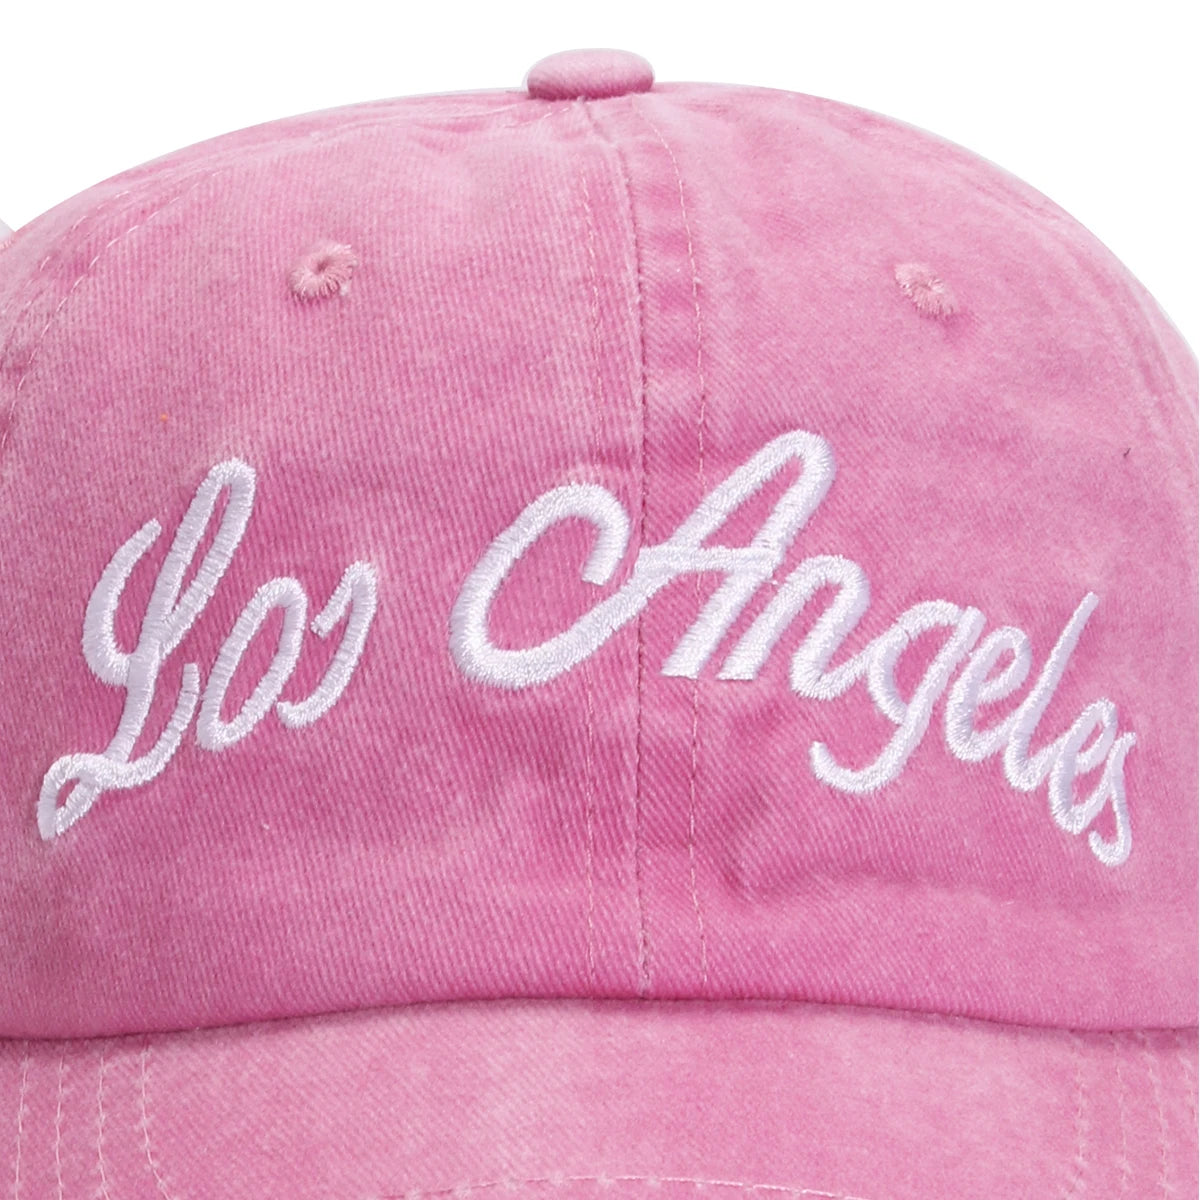 Pink Los Angeles Embroidered Baseball Cap